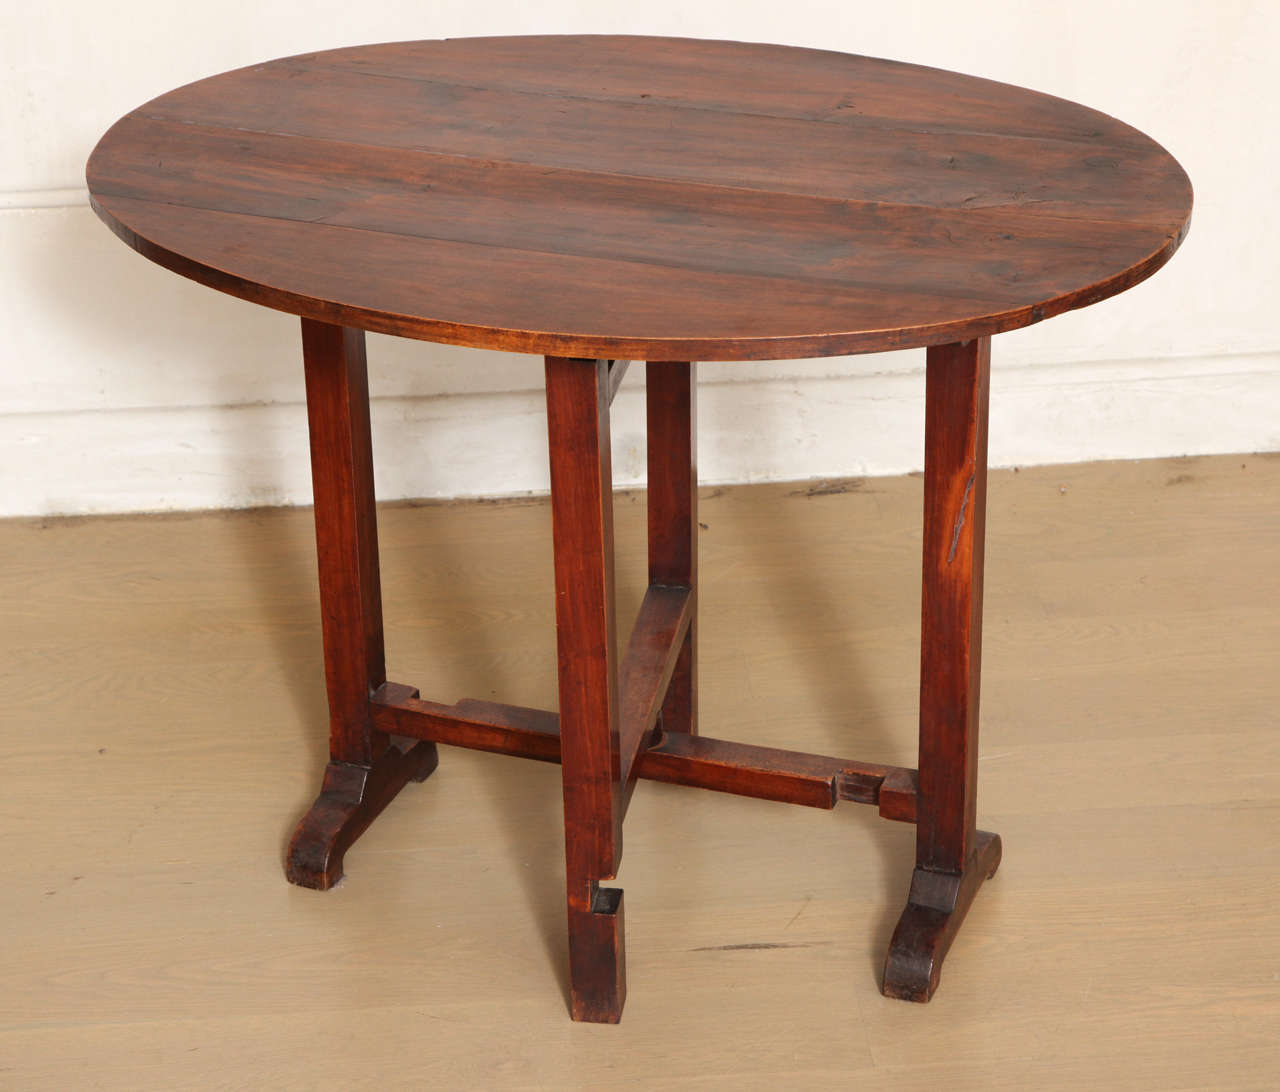 DETAILS
- French oval cherry folding tilt top side table

ORIGIN
- France, late 19th 20th century